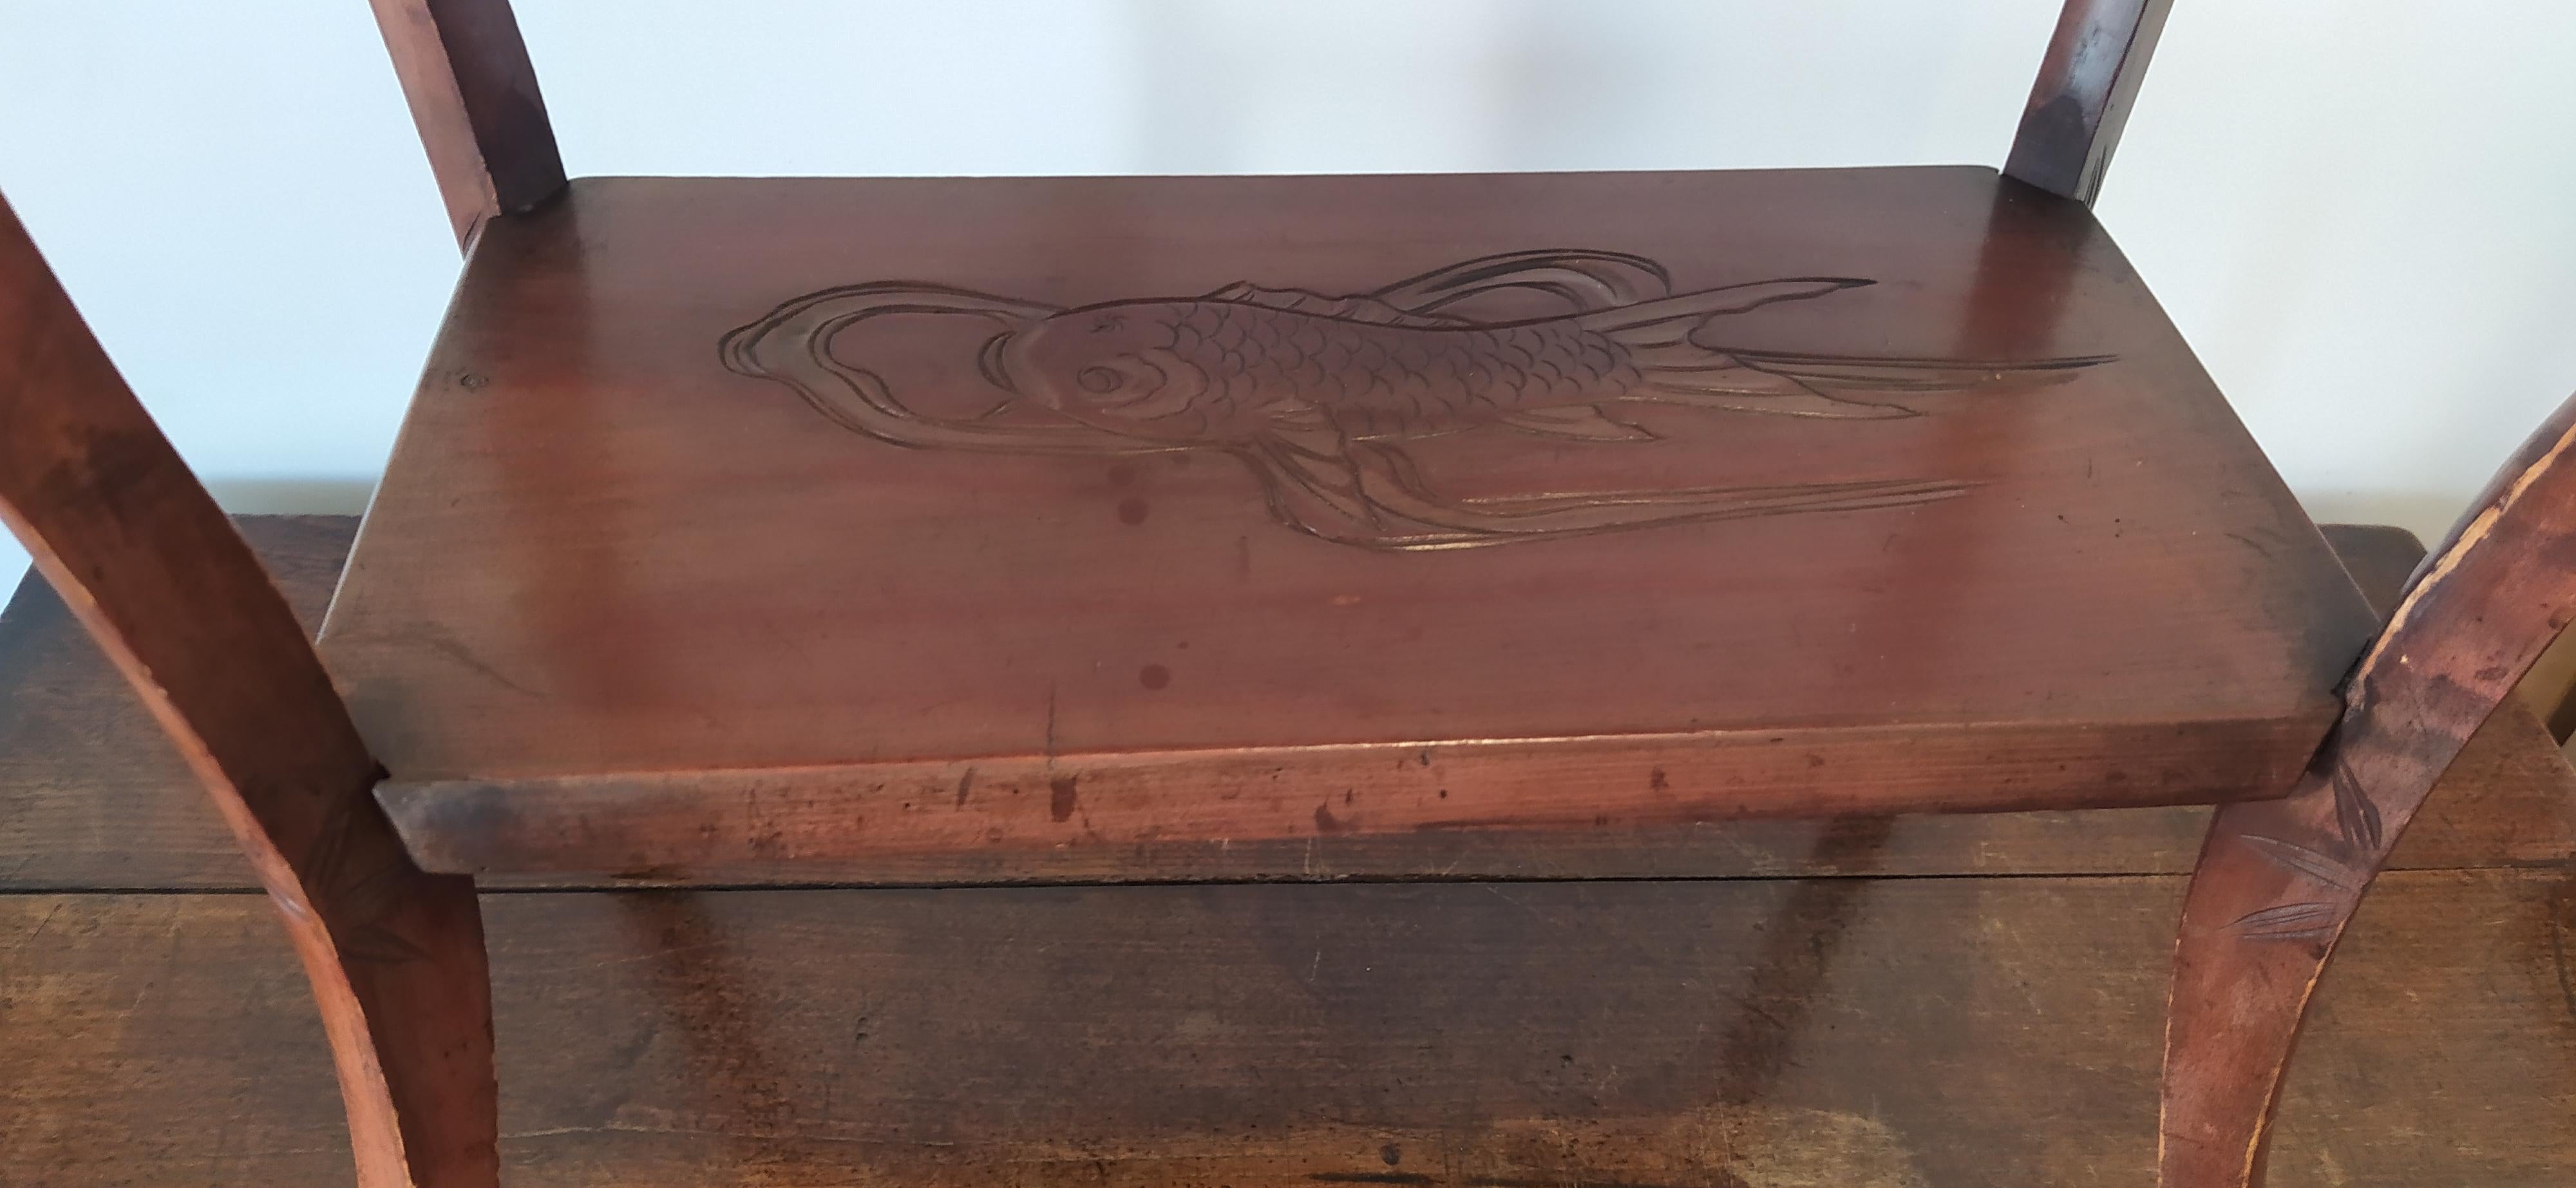 Arts and Crafts Arts & Crafts Liberty & Co Japanese Side Table, Carved Koi Carp, circa 1900